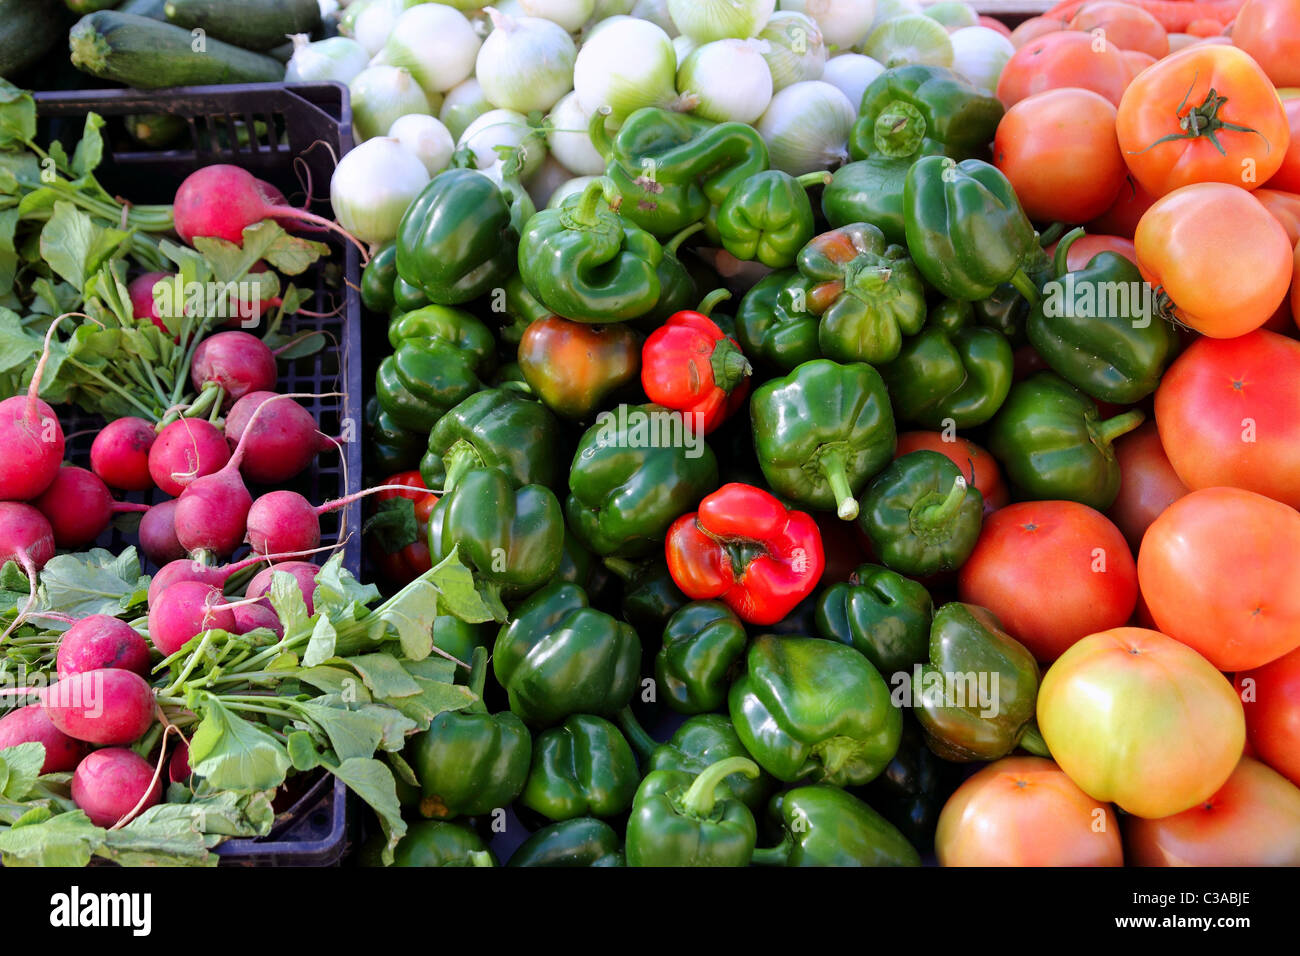 greengrocers radish tomatoes green red peppers pattern Stock Photo